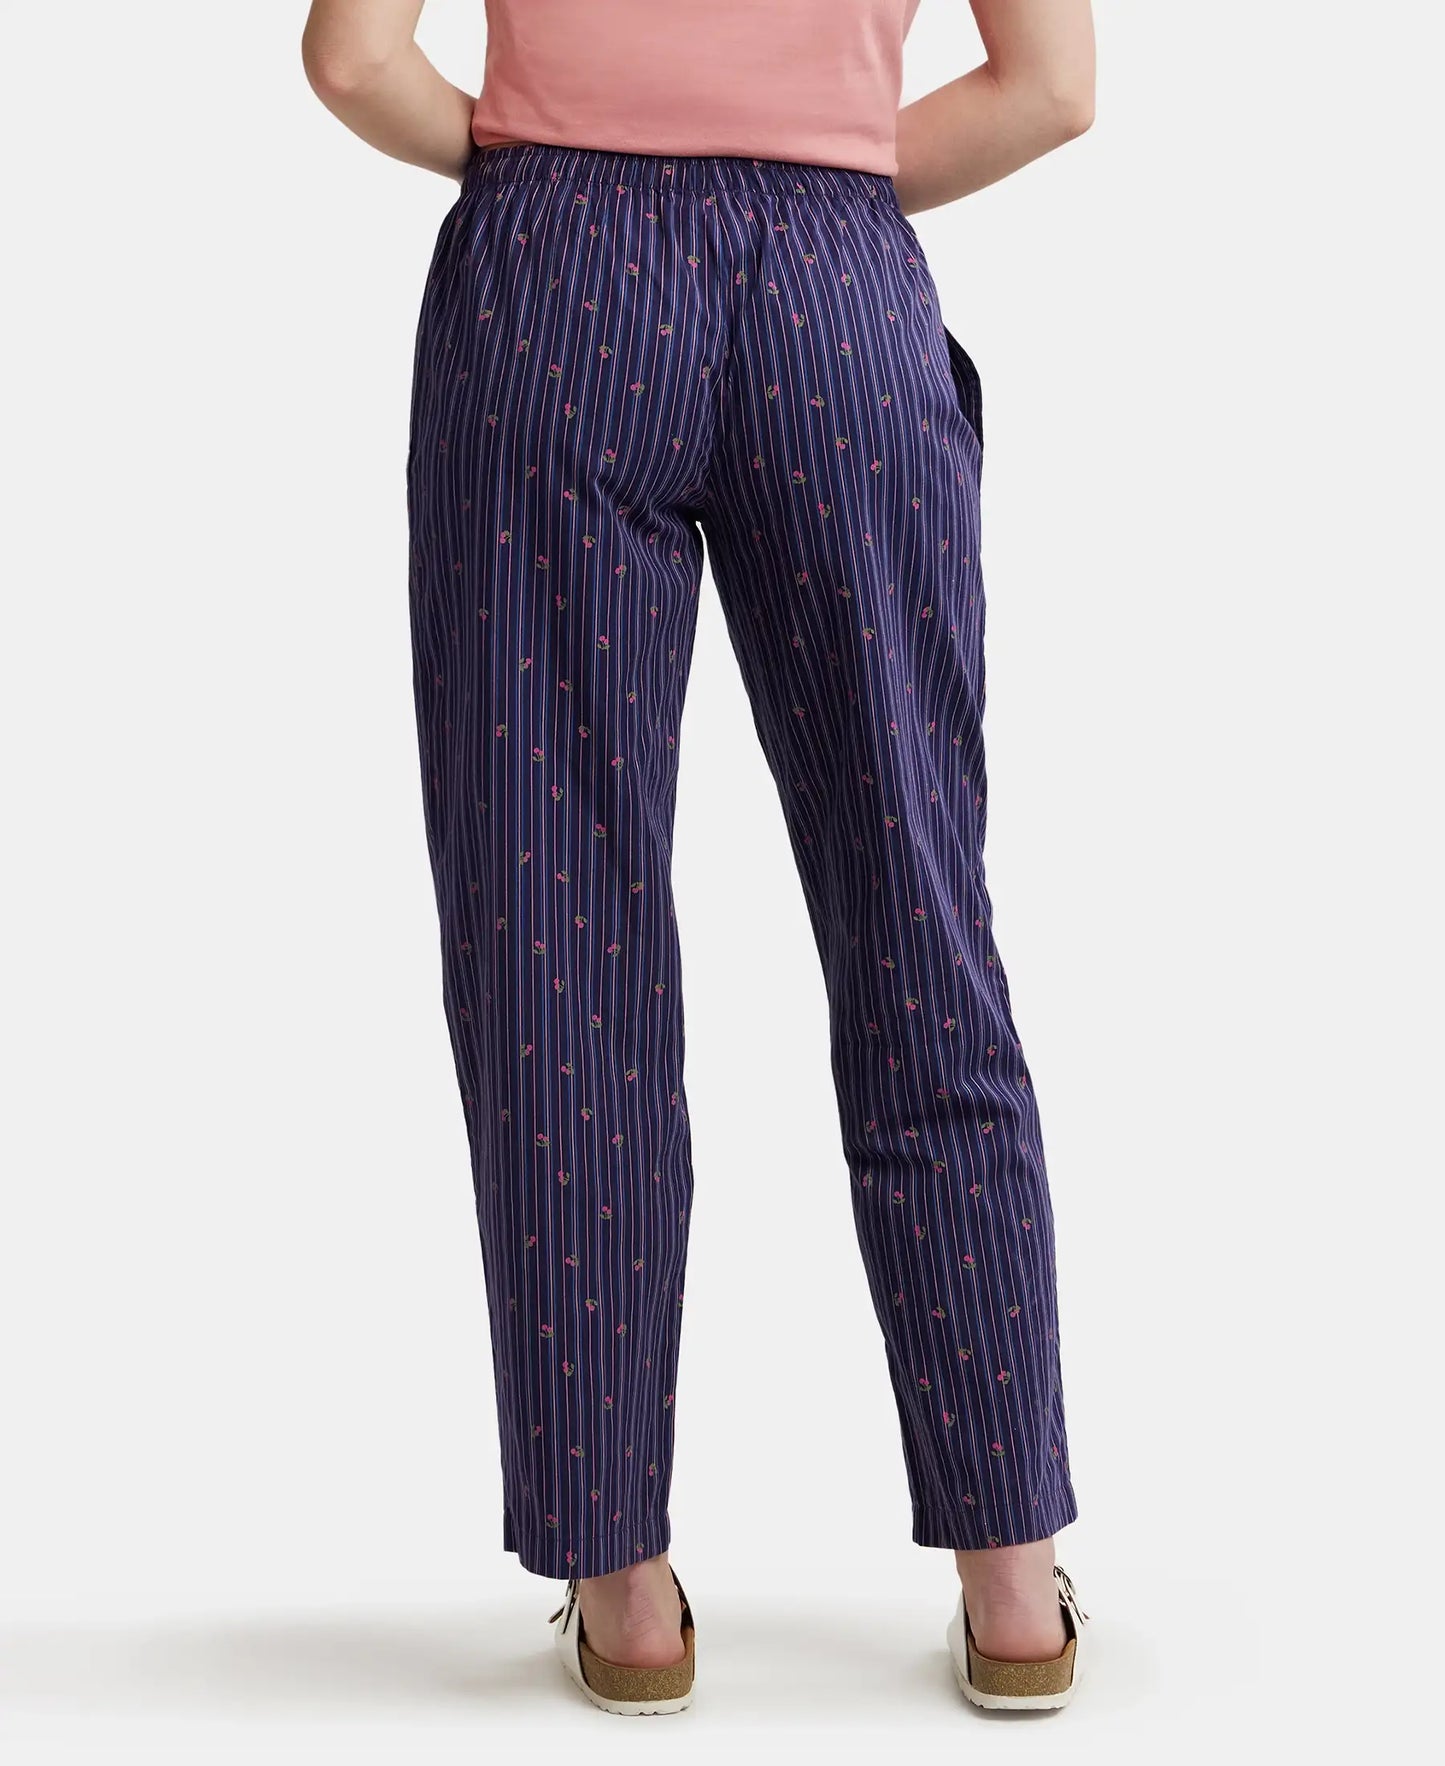 Super Combed Cotton Woven Fabric Relaxed Fit Striped Pyjama with Side Pockets - Classic Navy Assorted Checks-3